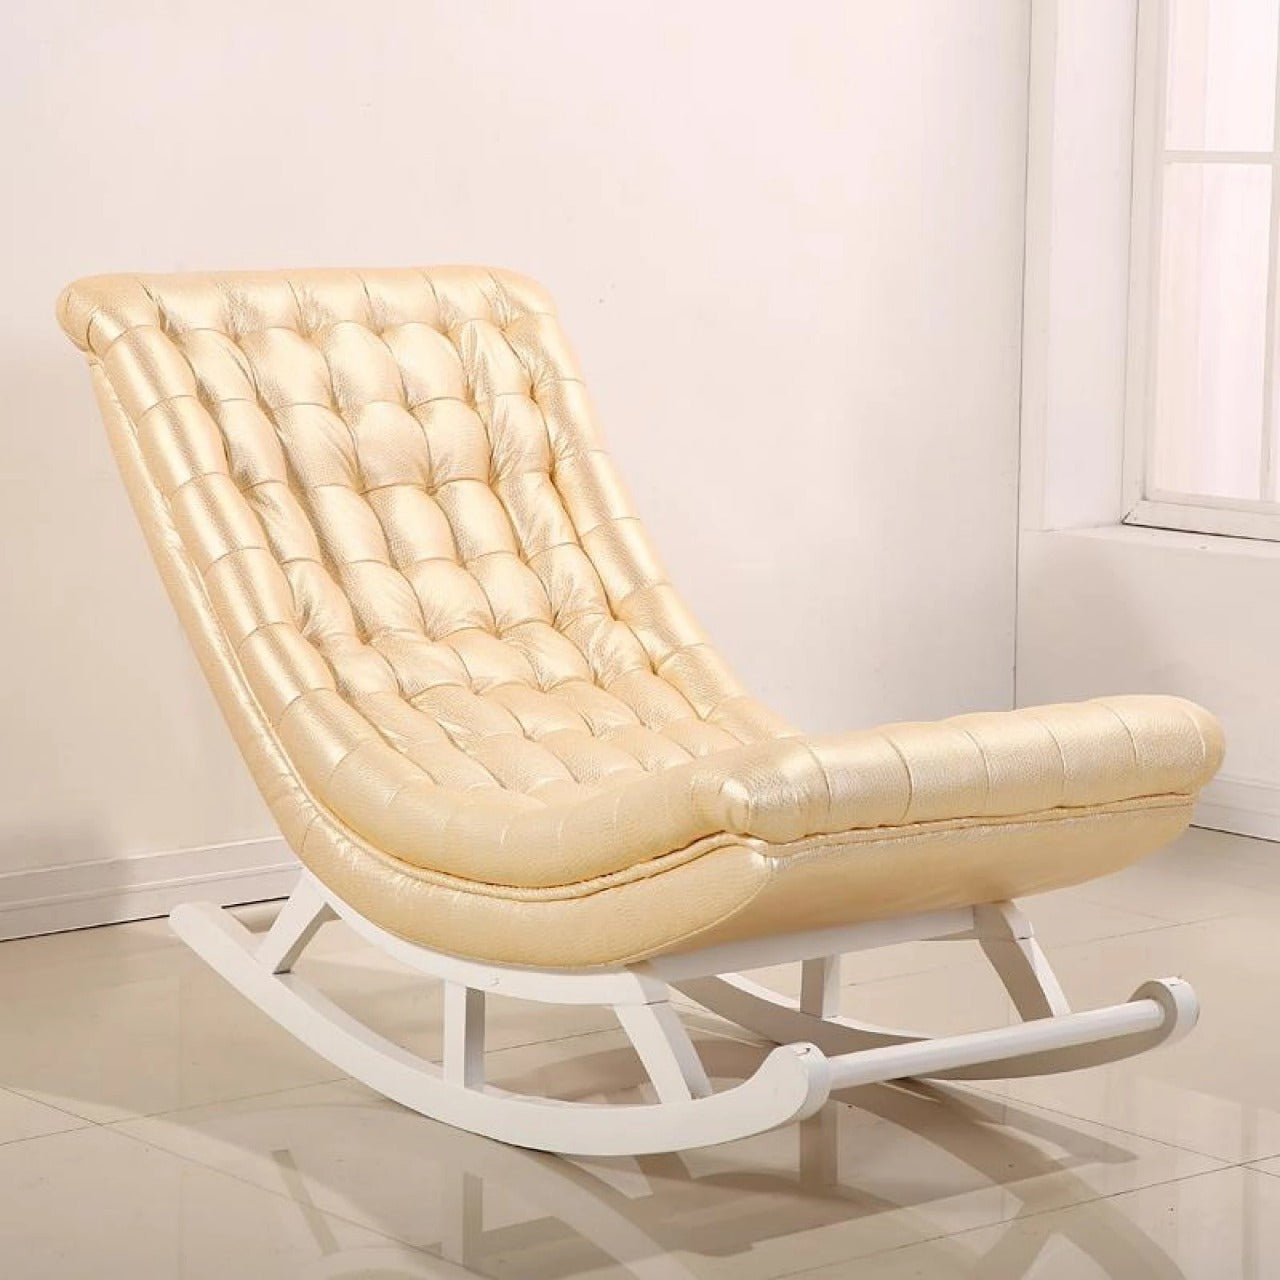 Rocking Chair: Glossy Leatherette Rocking Chair